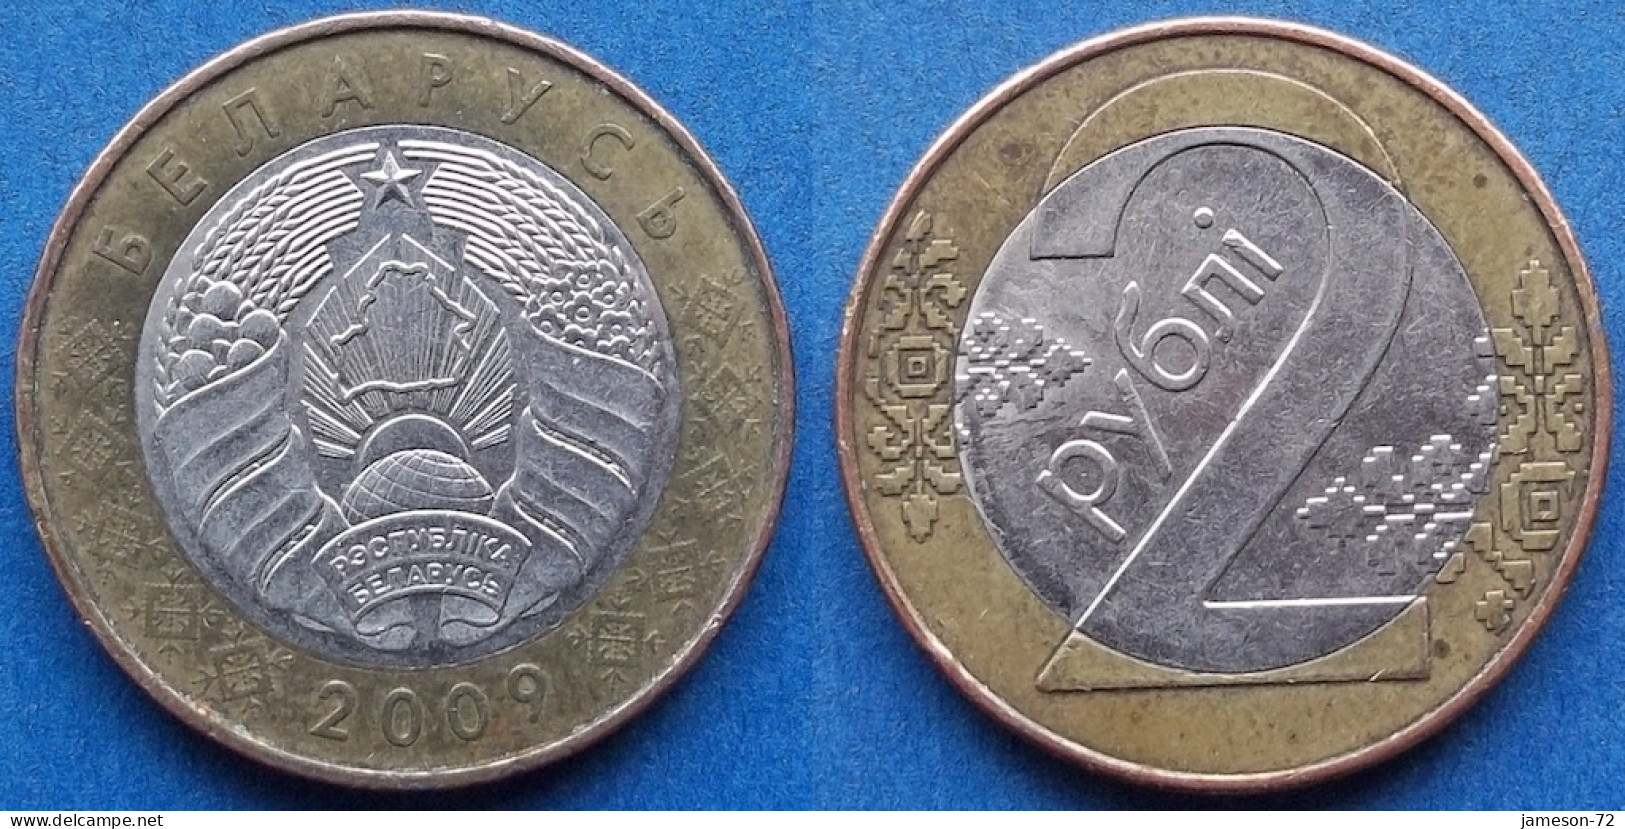 BELARUS - 2 Rouble 2009 KM# 568 Independent Republic (1991) - Edelweiss Coins - Bielorussia